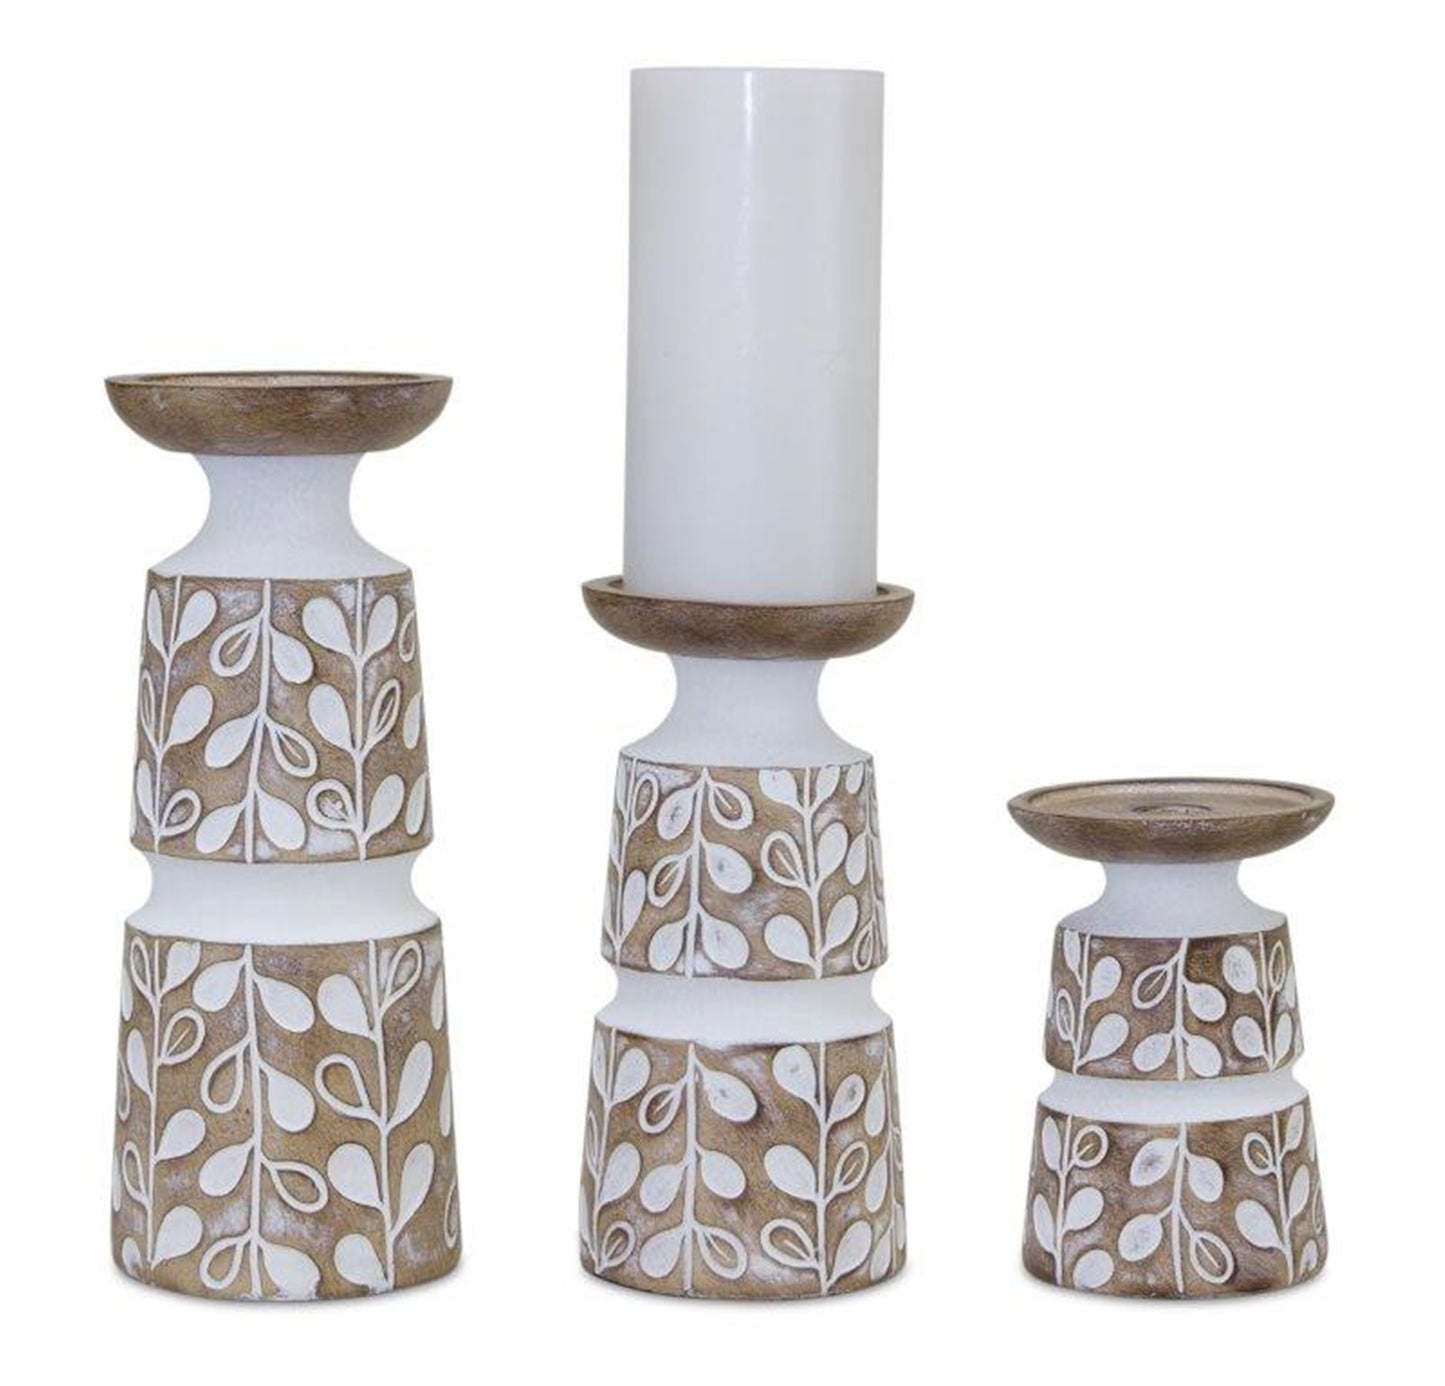 Candle Holder (Set of 3) 5.5"H, 8"H, 10.25"H Resin